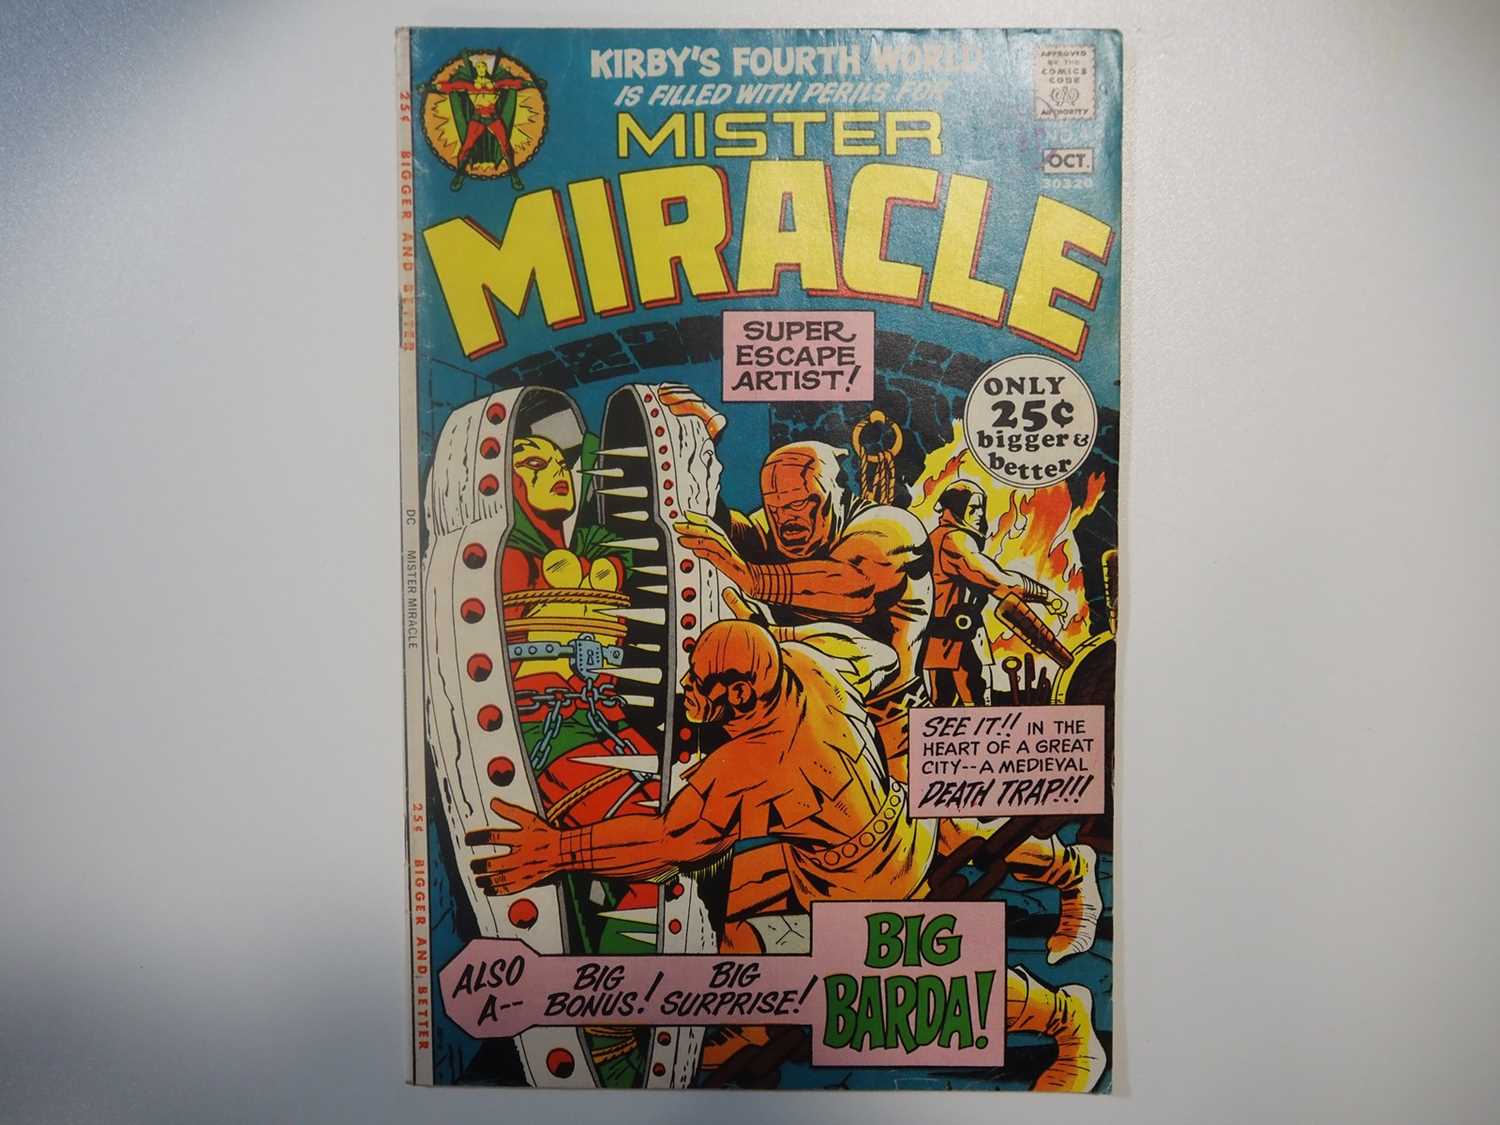 MISTER MIRACLE #1, 2, 3, 4, 5, 6, 7, 8, 9, 10, 11, 12, 13, 17 (14 in Lot) - (1971/1974 - DC) - - Image 8 of 12